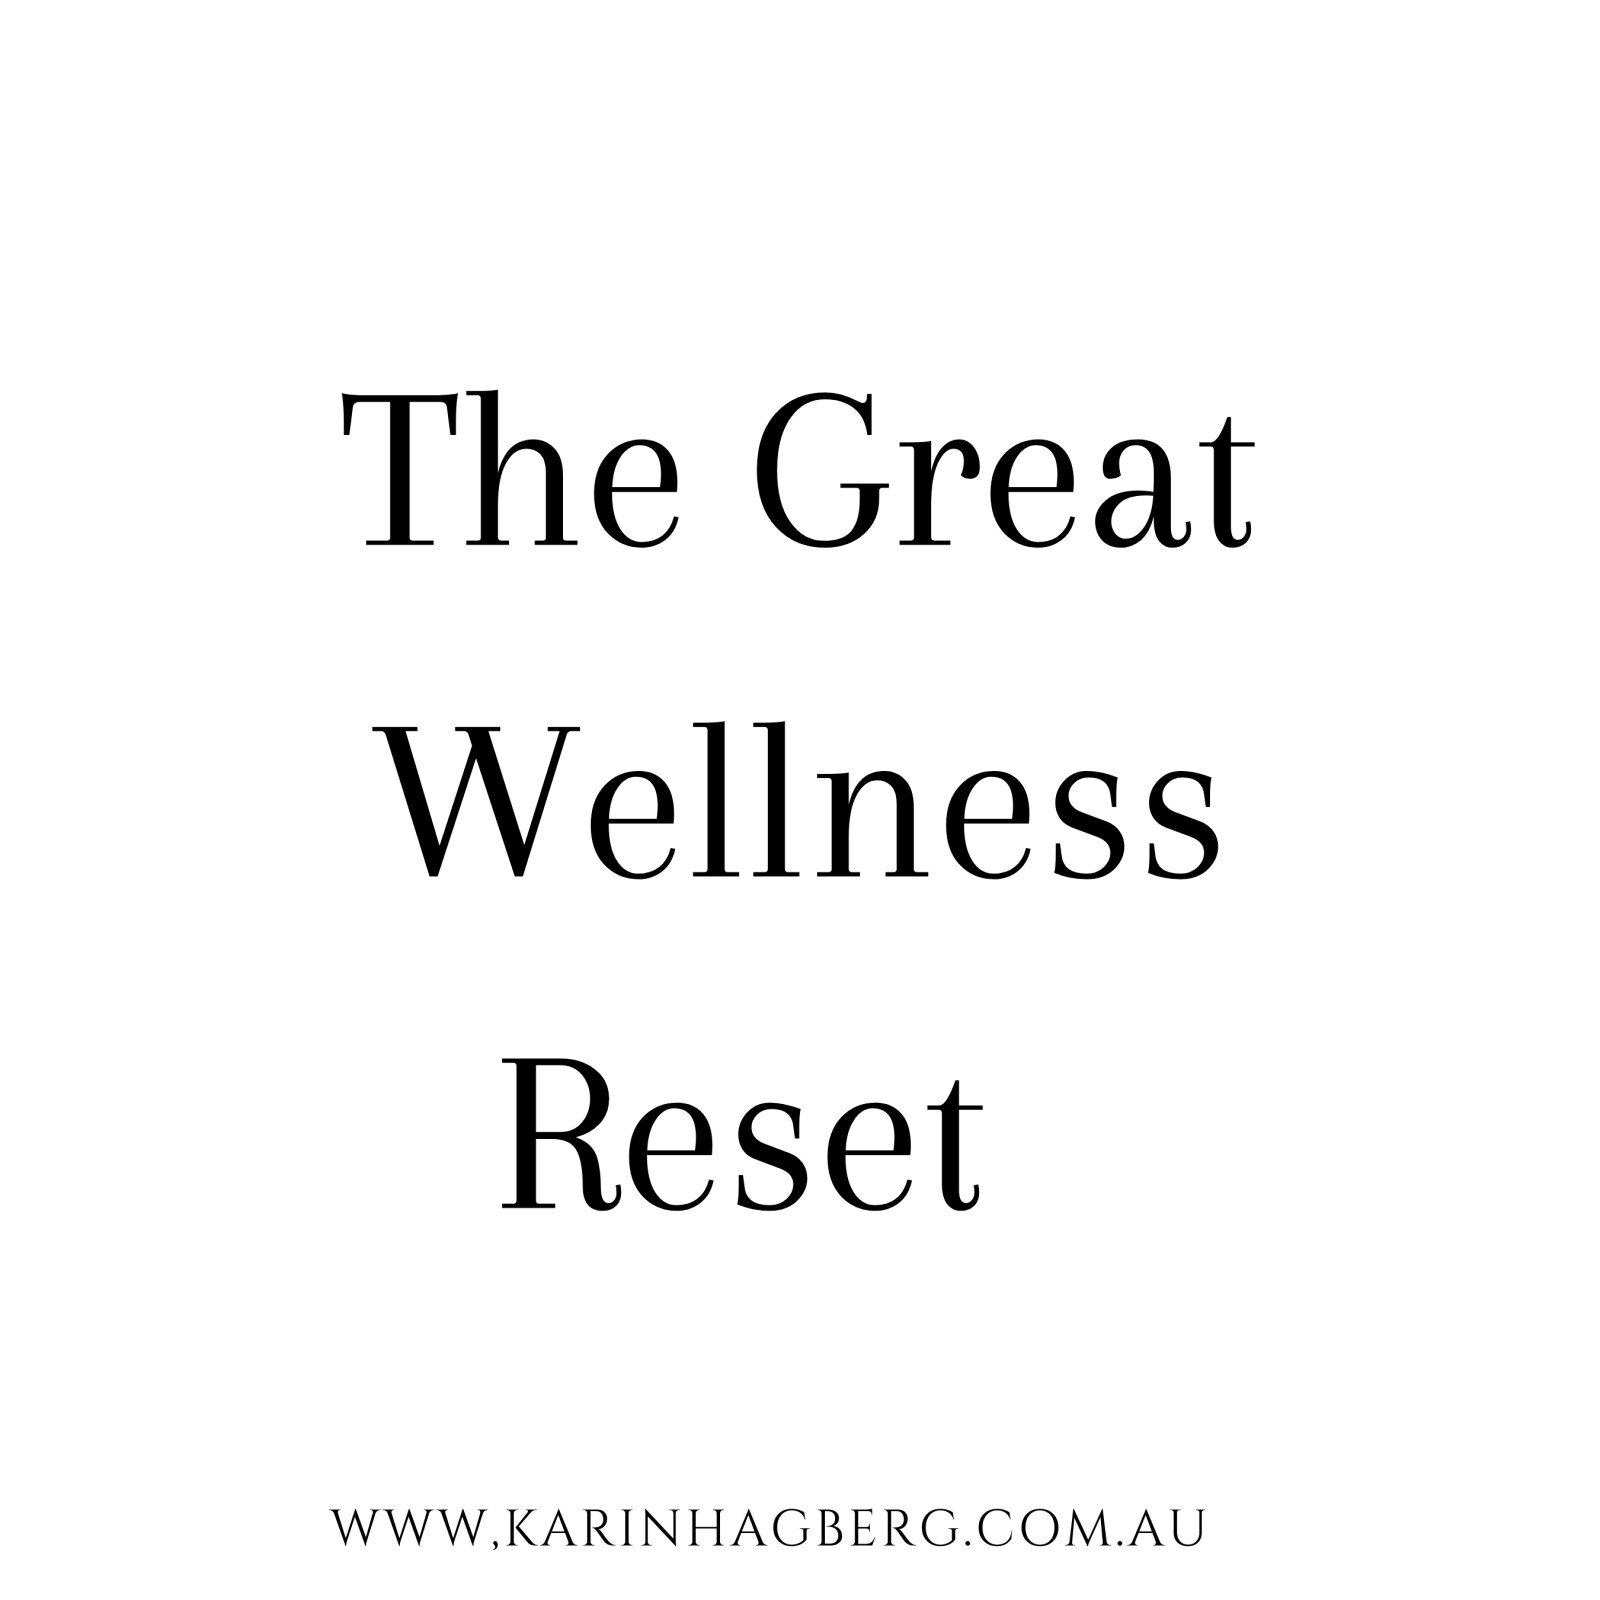 The Great Wellness Reset